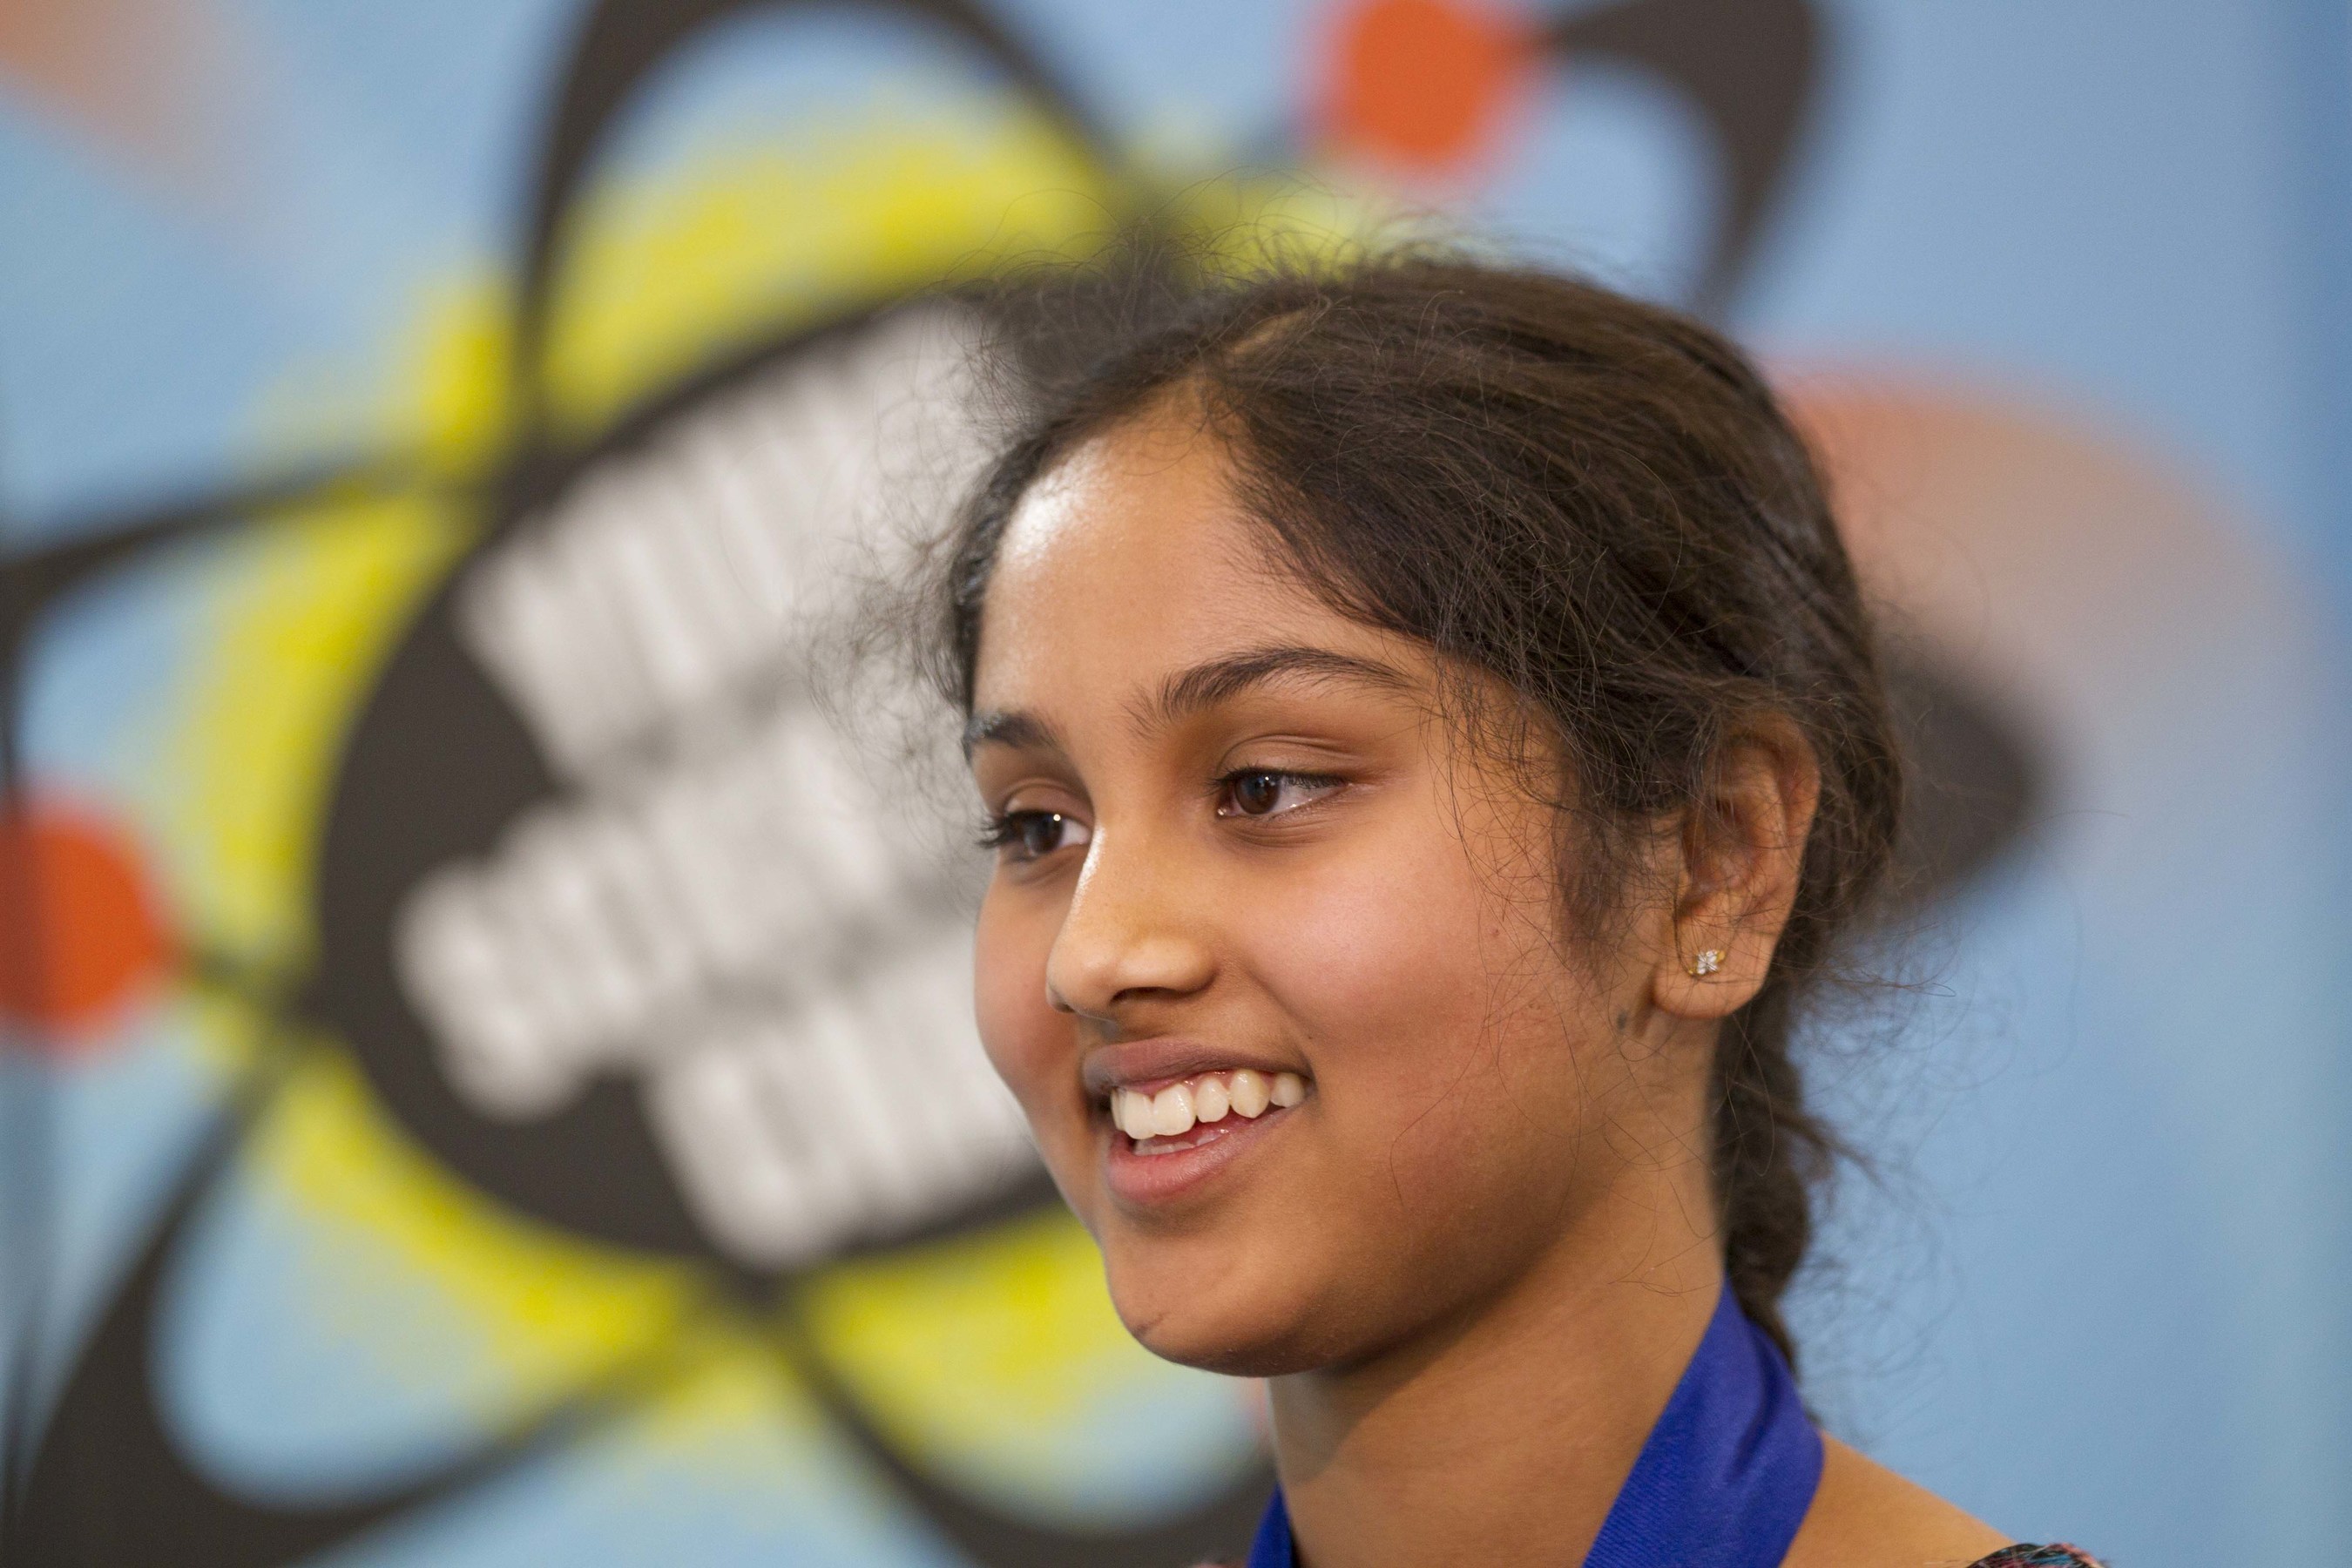 13-year-old Maanasa Mendu of Mason, OH was awarded $25,000 and named America's Top Young Scientist in the annual Discovery Education 3M Young Scientist Challenge.